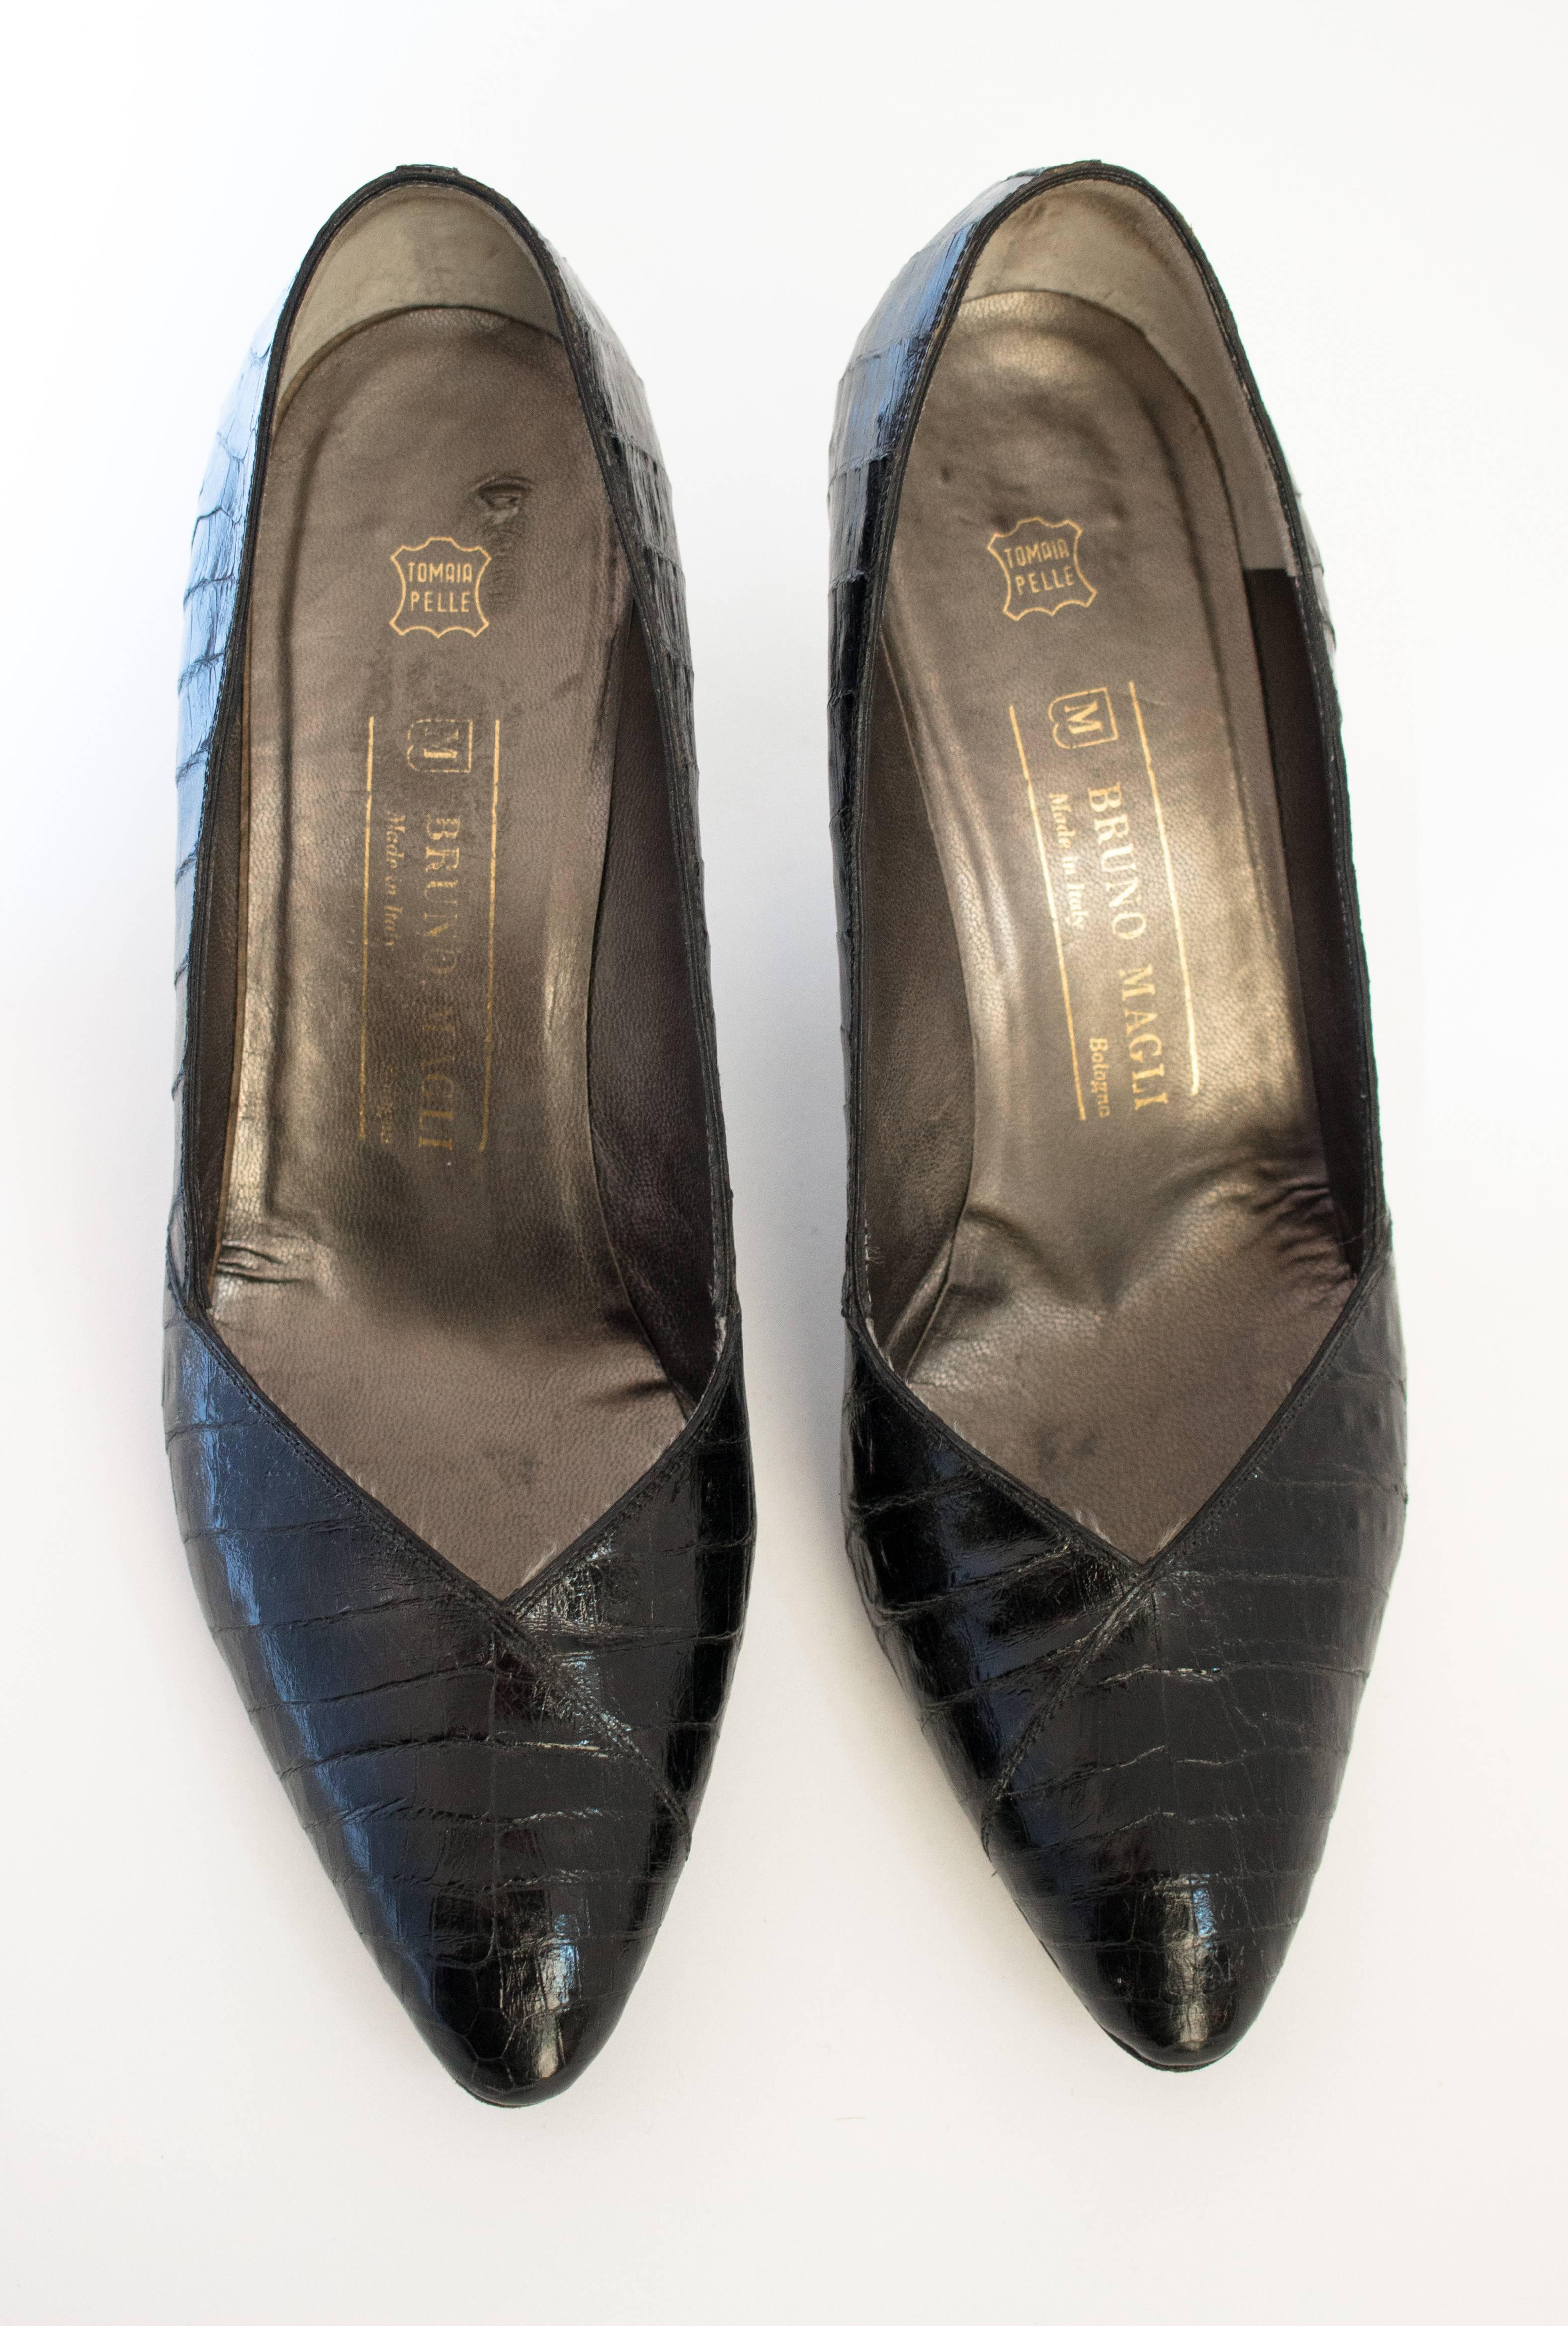 Bruno Magli 1950s alligator heels. Crossover detail on shoe upper. Leather sole. Made in Italy. Size 10 B.

Palm of foot: 3